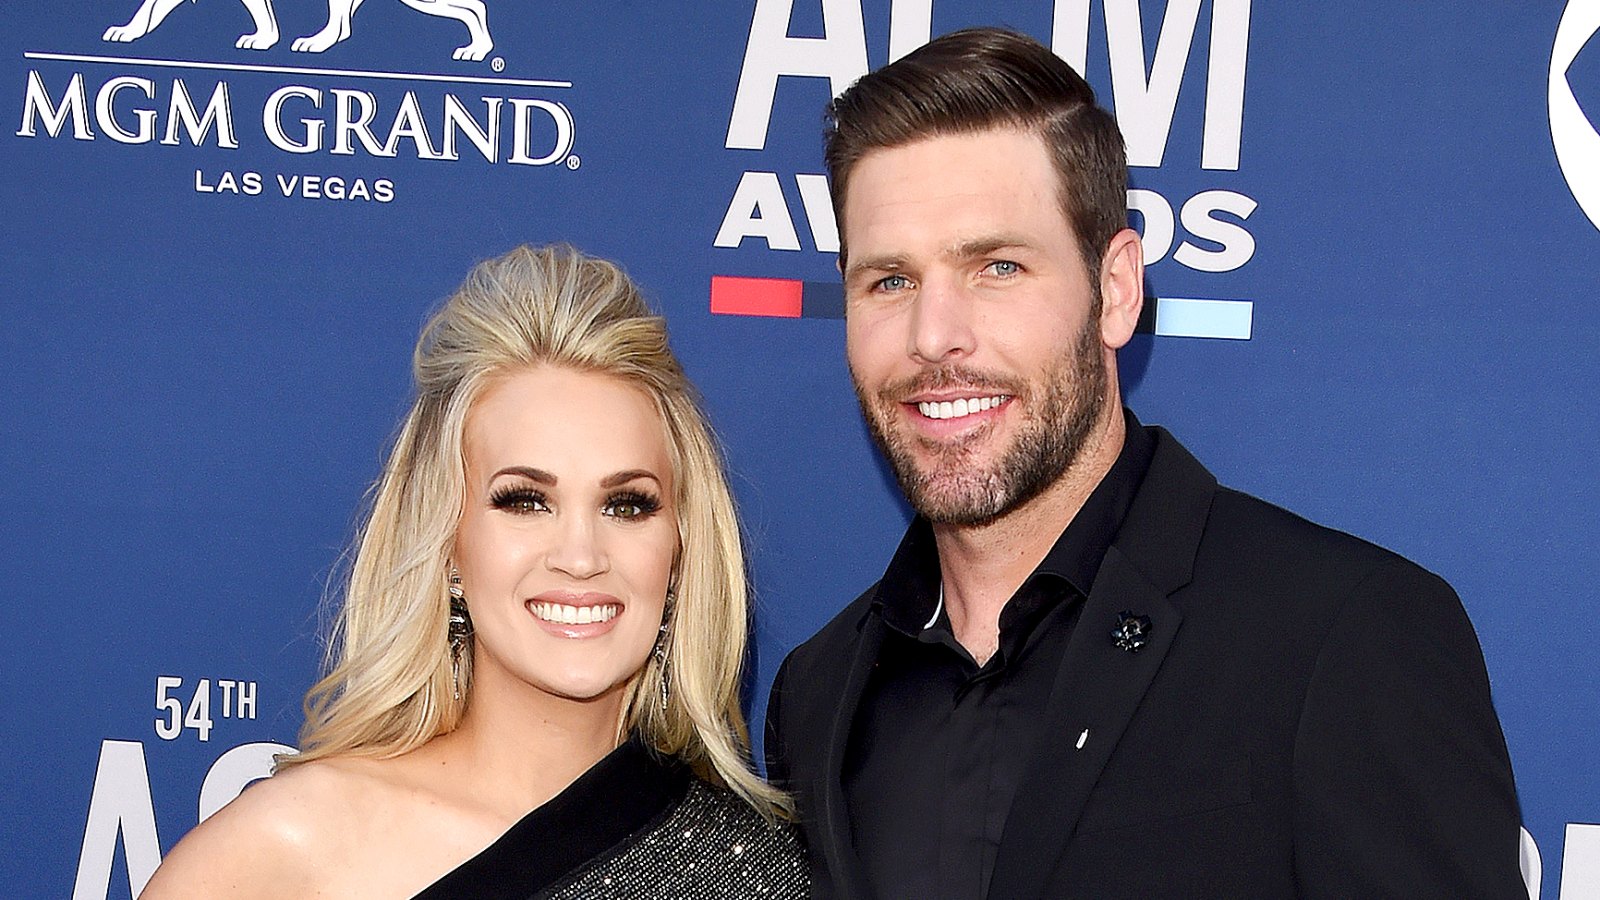 Carrie-Underwood-and-Mike-Fisher-11-Years-Since-Meeting